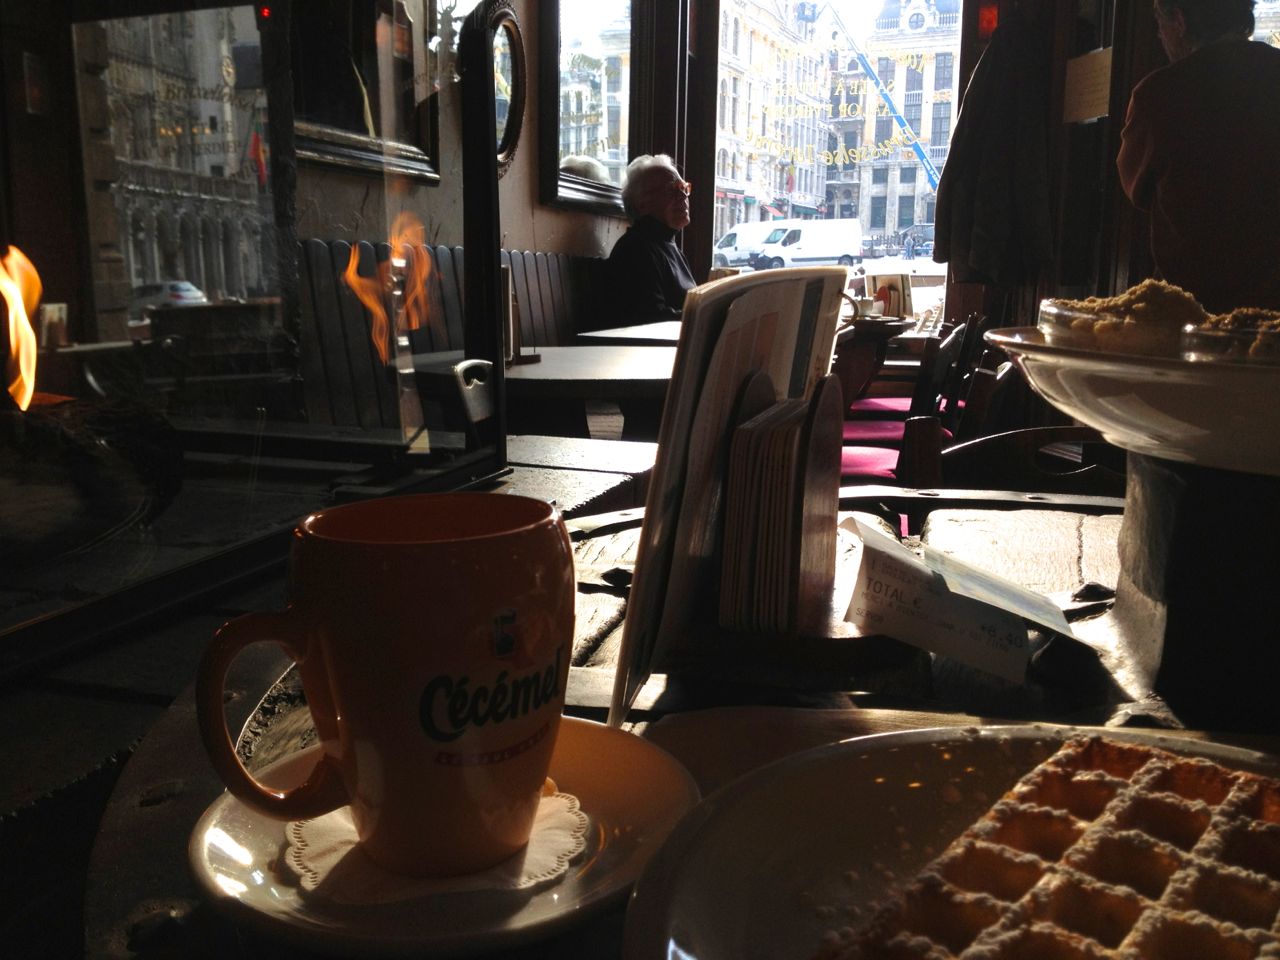 Brussels: Settling into the European routine with a chocolat chaud and waffle